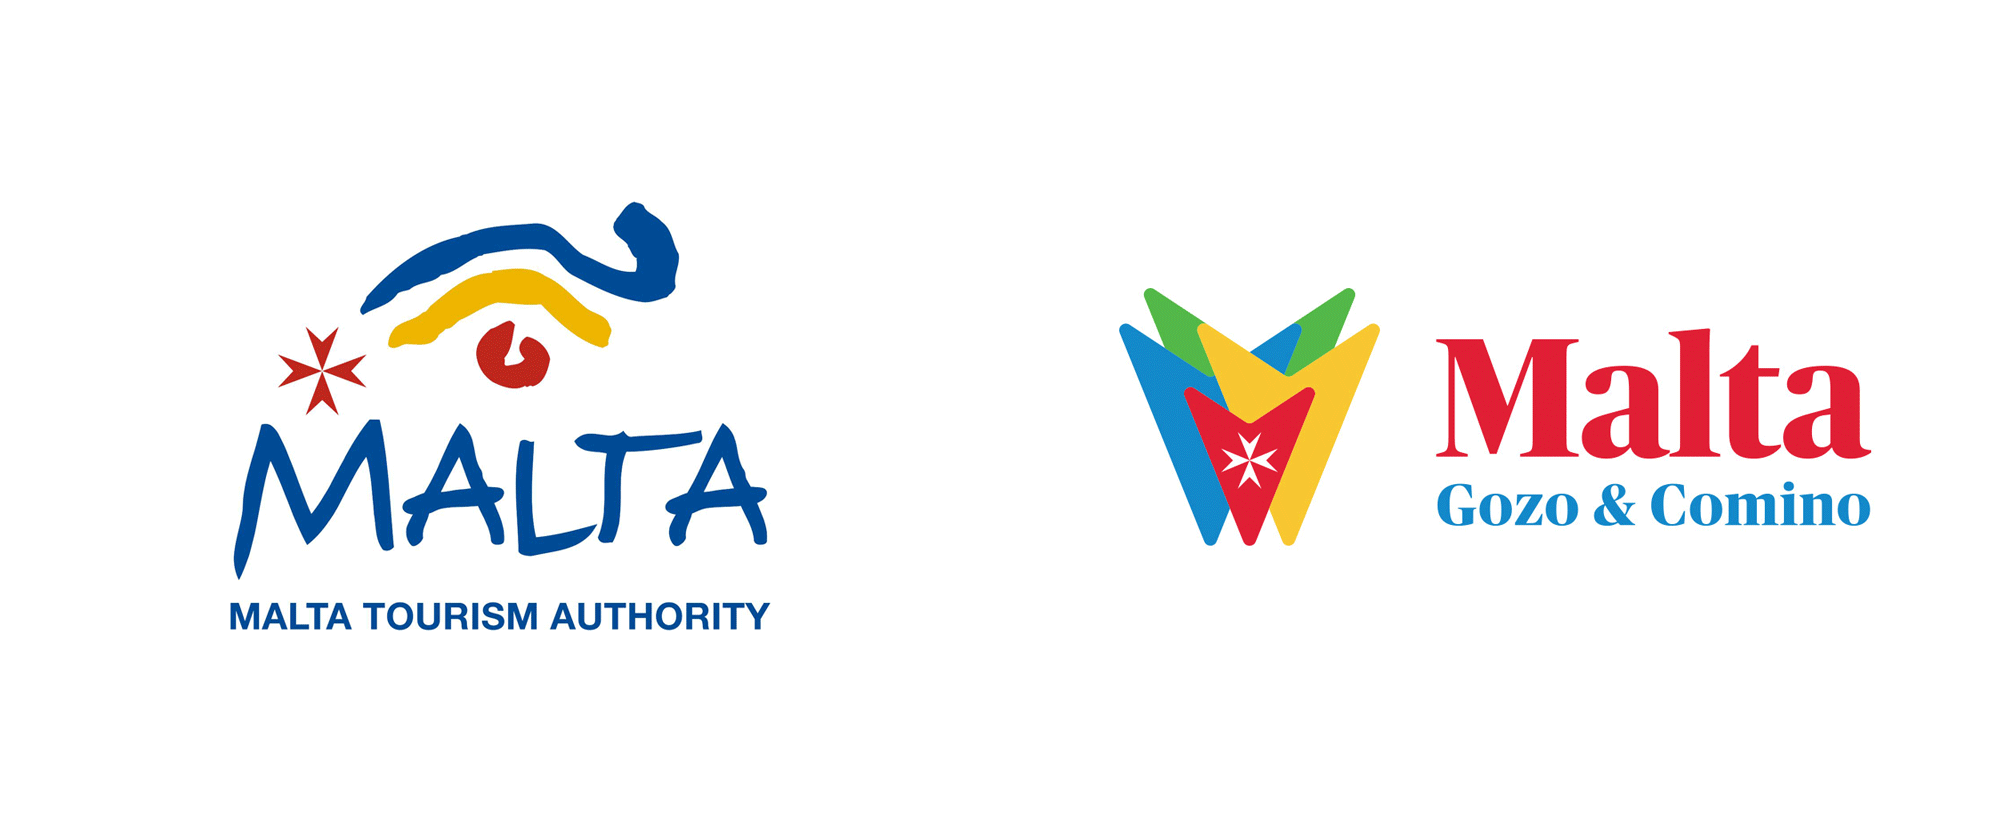 New Logo and Identity for Malta by OLIVER